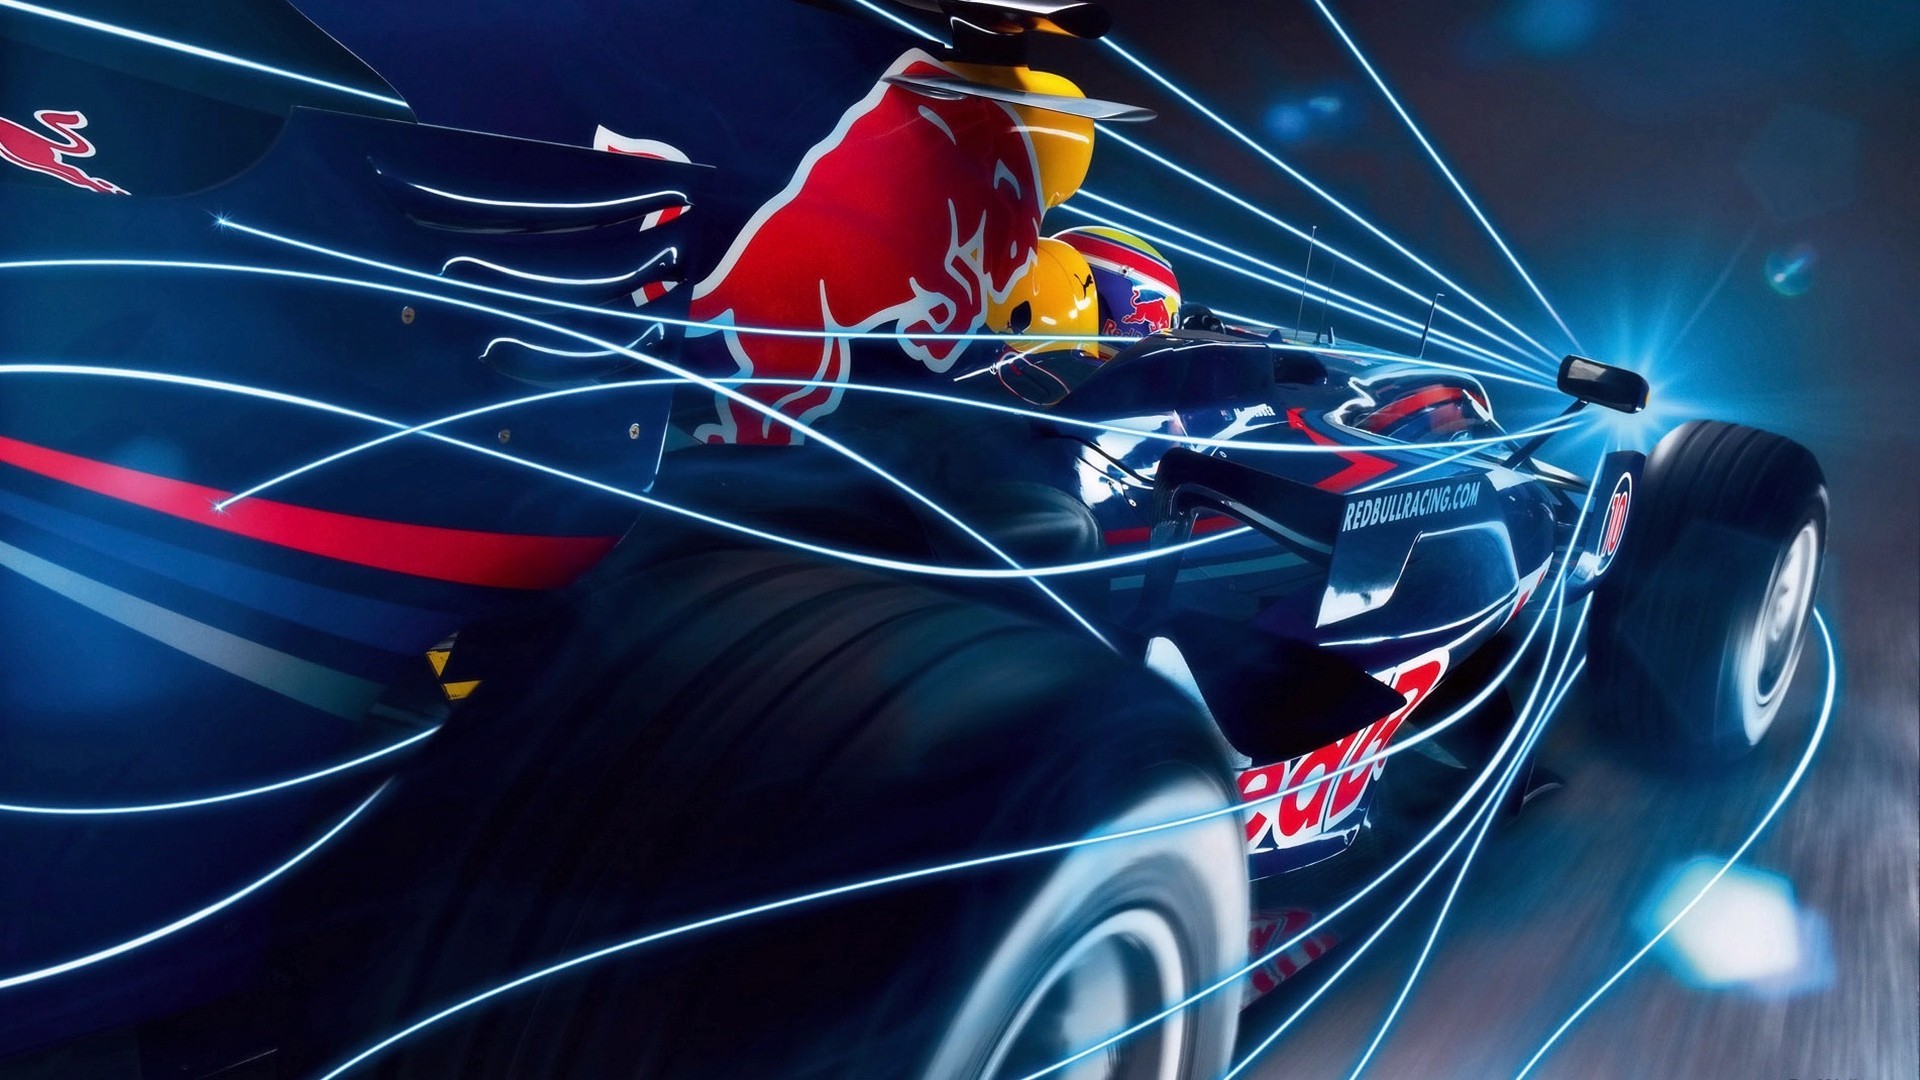 Formula 1 Red Bull Racing Wallpapers Hd Desktop And Mobile Backgrounds